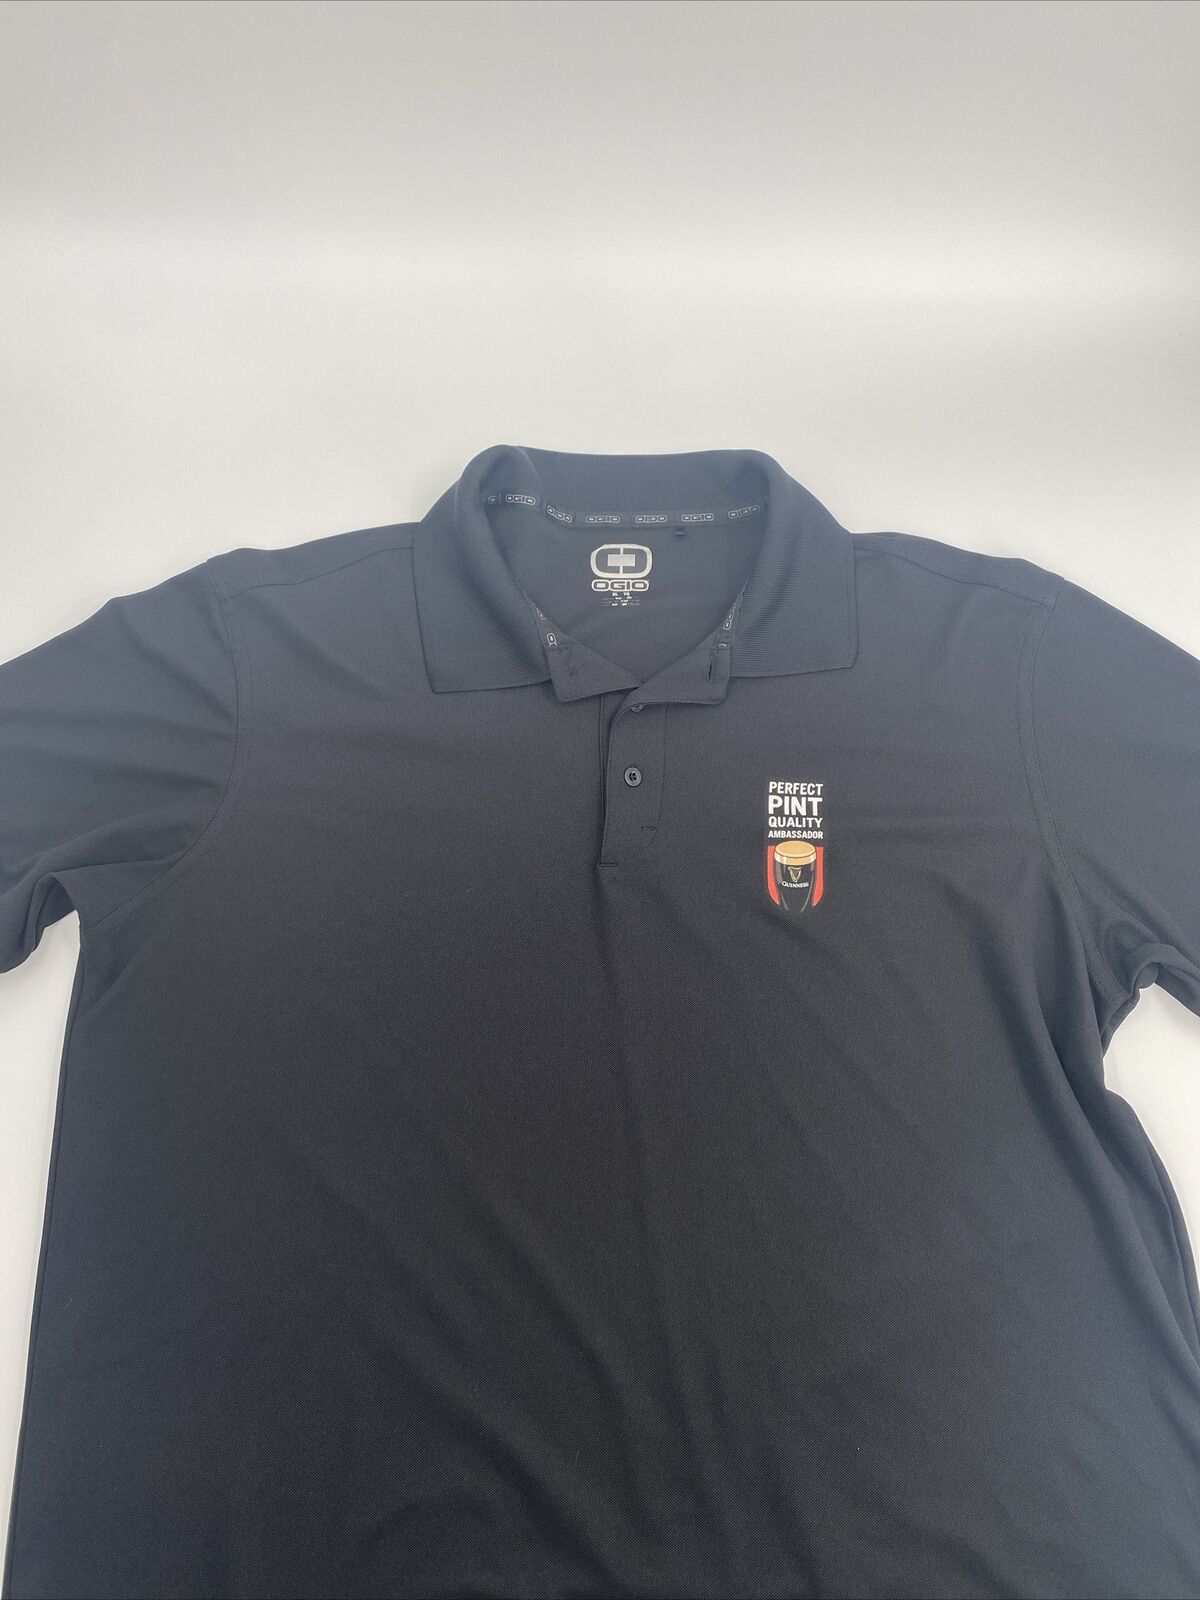 Guinness Beer Authentic. Ogio brand perfect pint quality ambassador polo XL